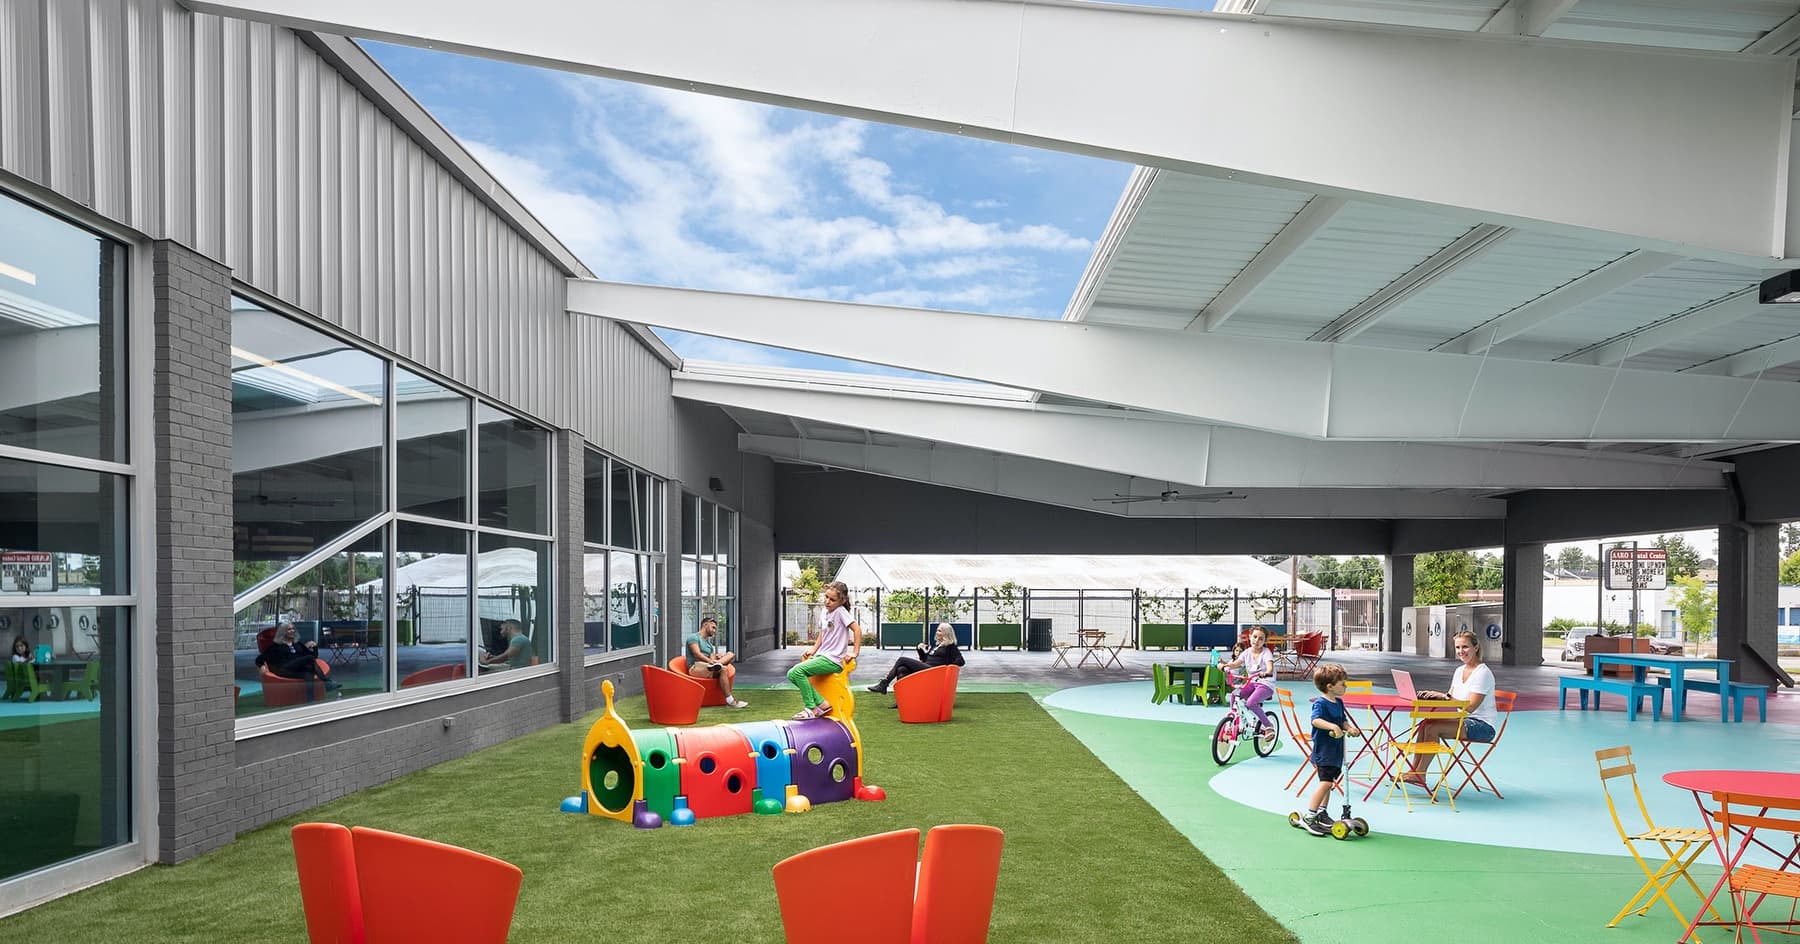 Southeast Library in Columbia SC engages their community with outdoor learning spaces